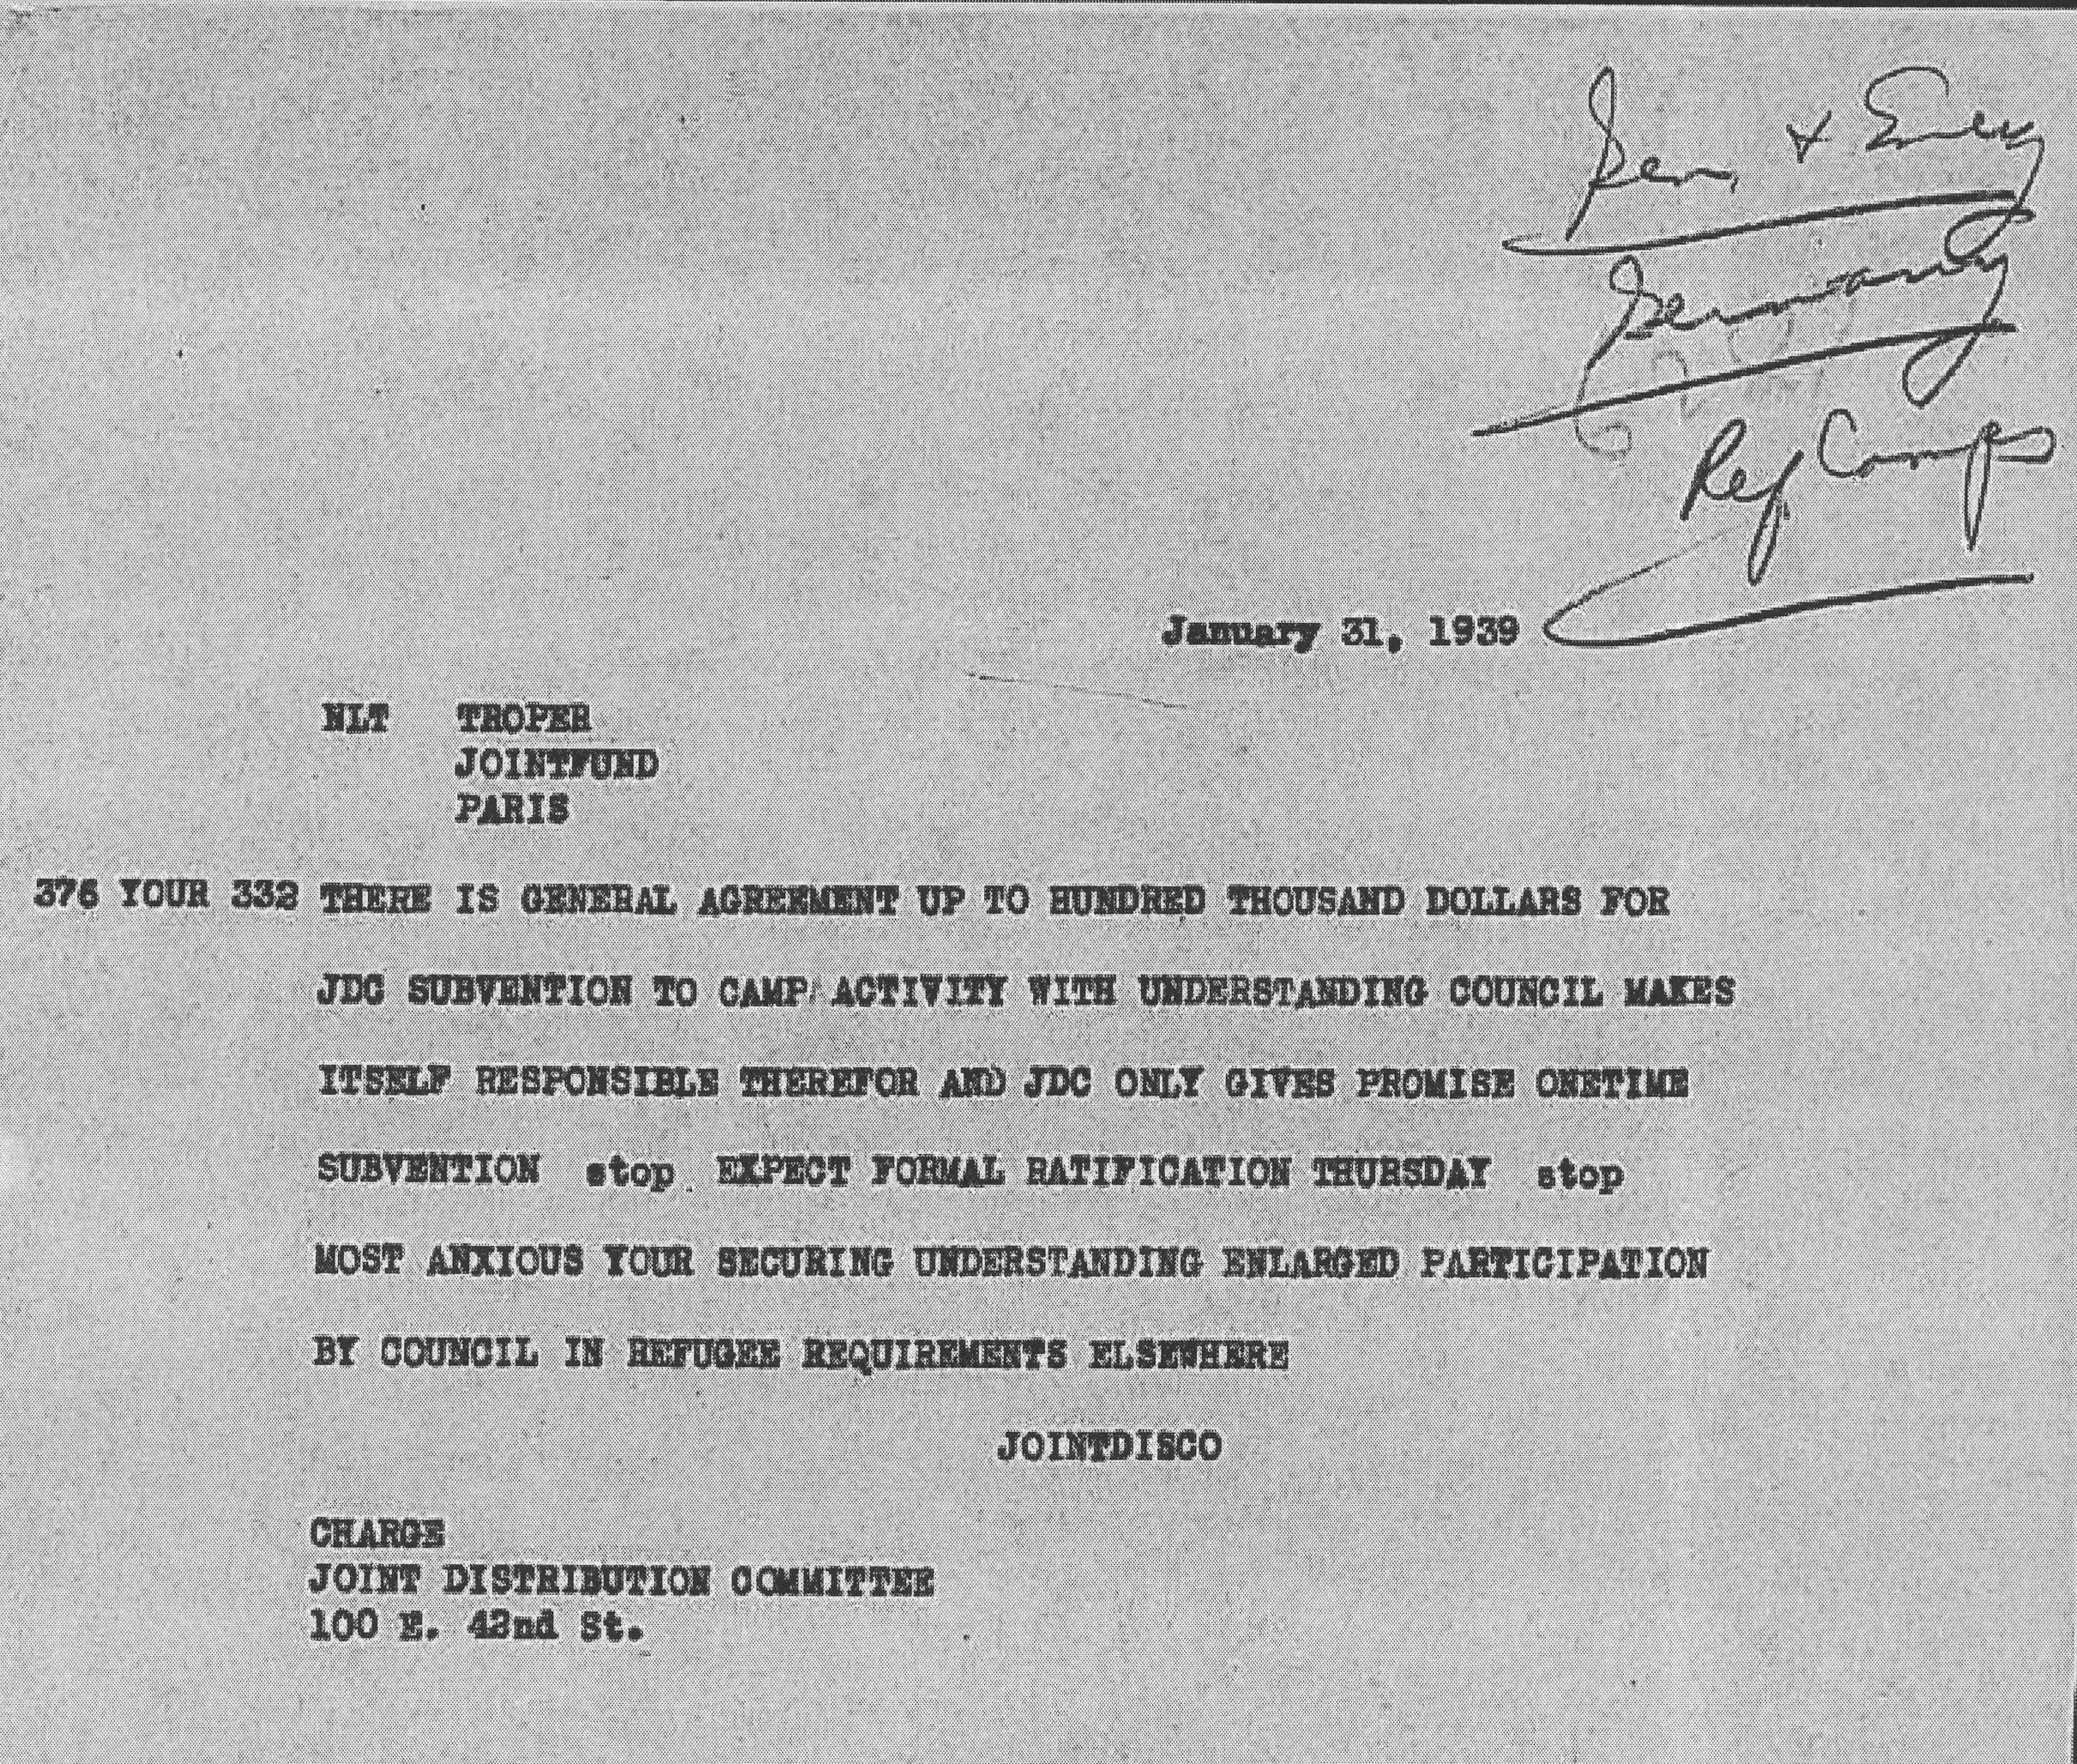 Richborough transit camp, Joint Distribution Committee, Cable, Troper, Paris, New York, General agreement up to $100,000 for camp activity on understanding CGJ is responsible, "Expect formal ratification Thursday", Anxious that CGJ will increase participation in other refugee requirements, 31 January 1939